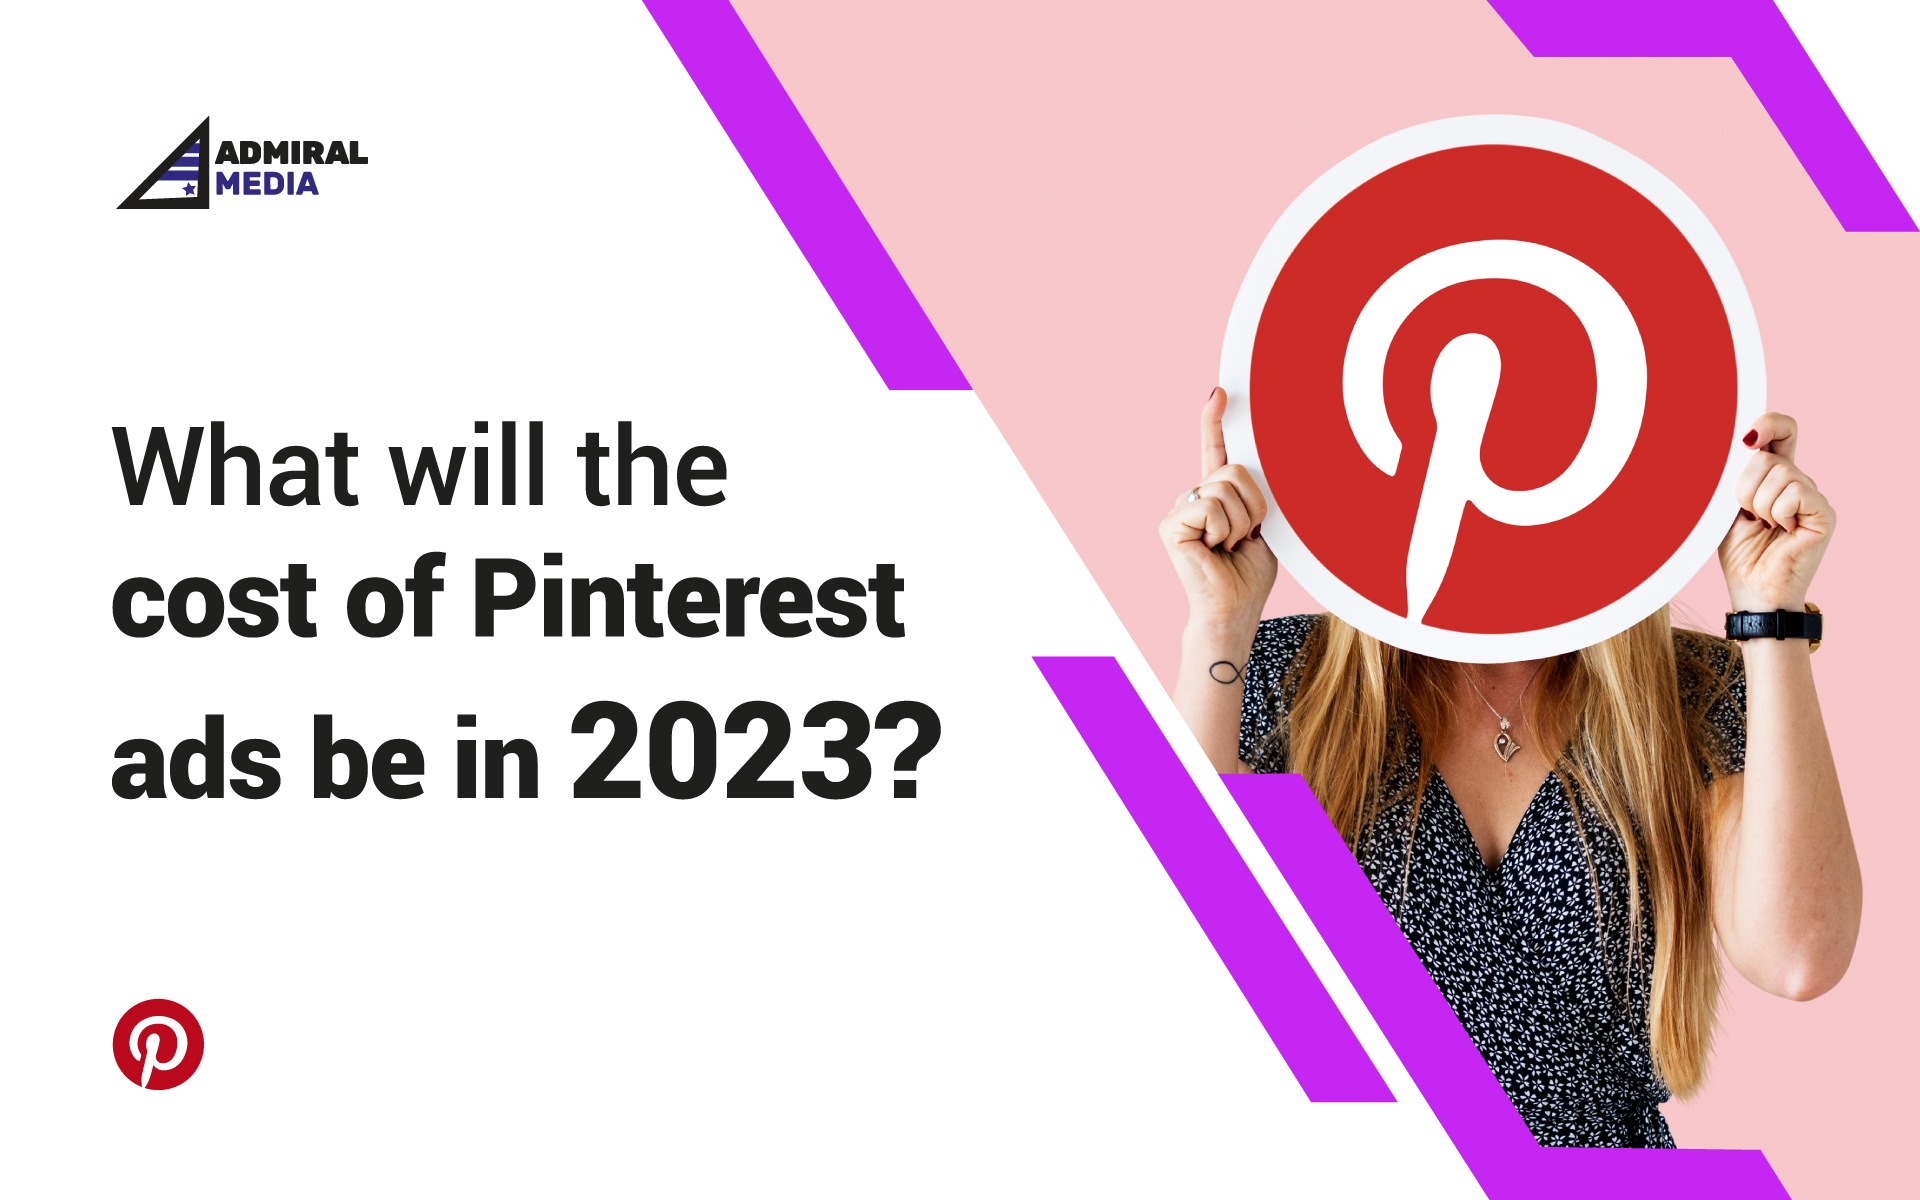 What will the cost of Pinterest ads be in 2023?